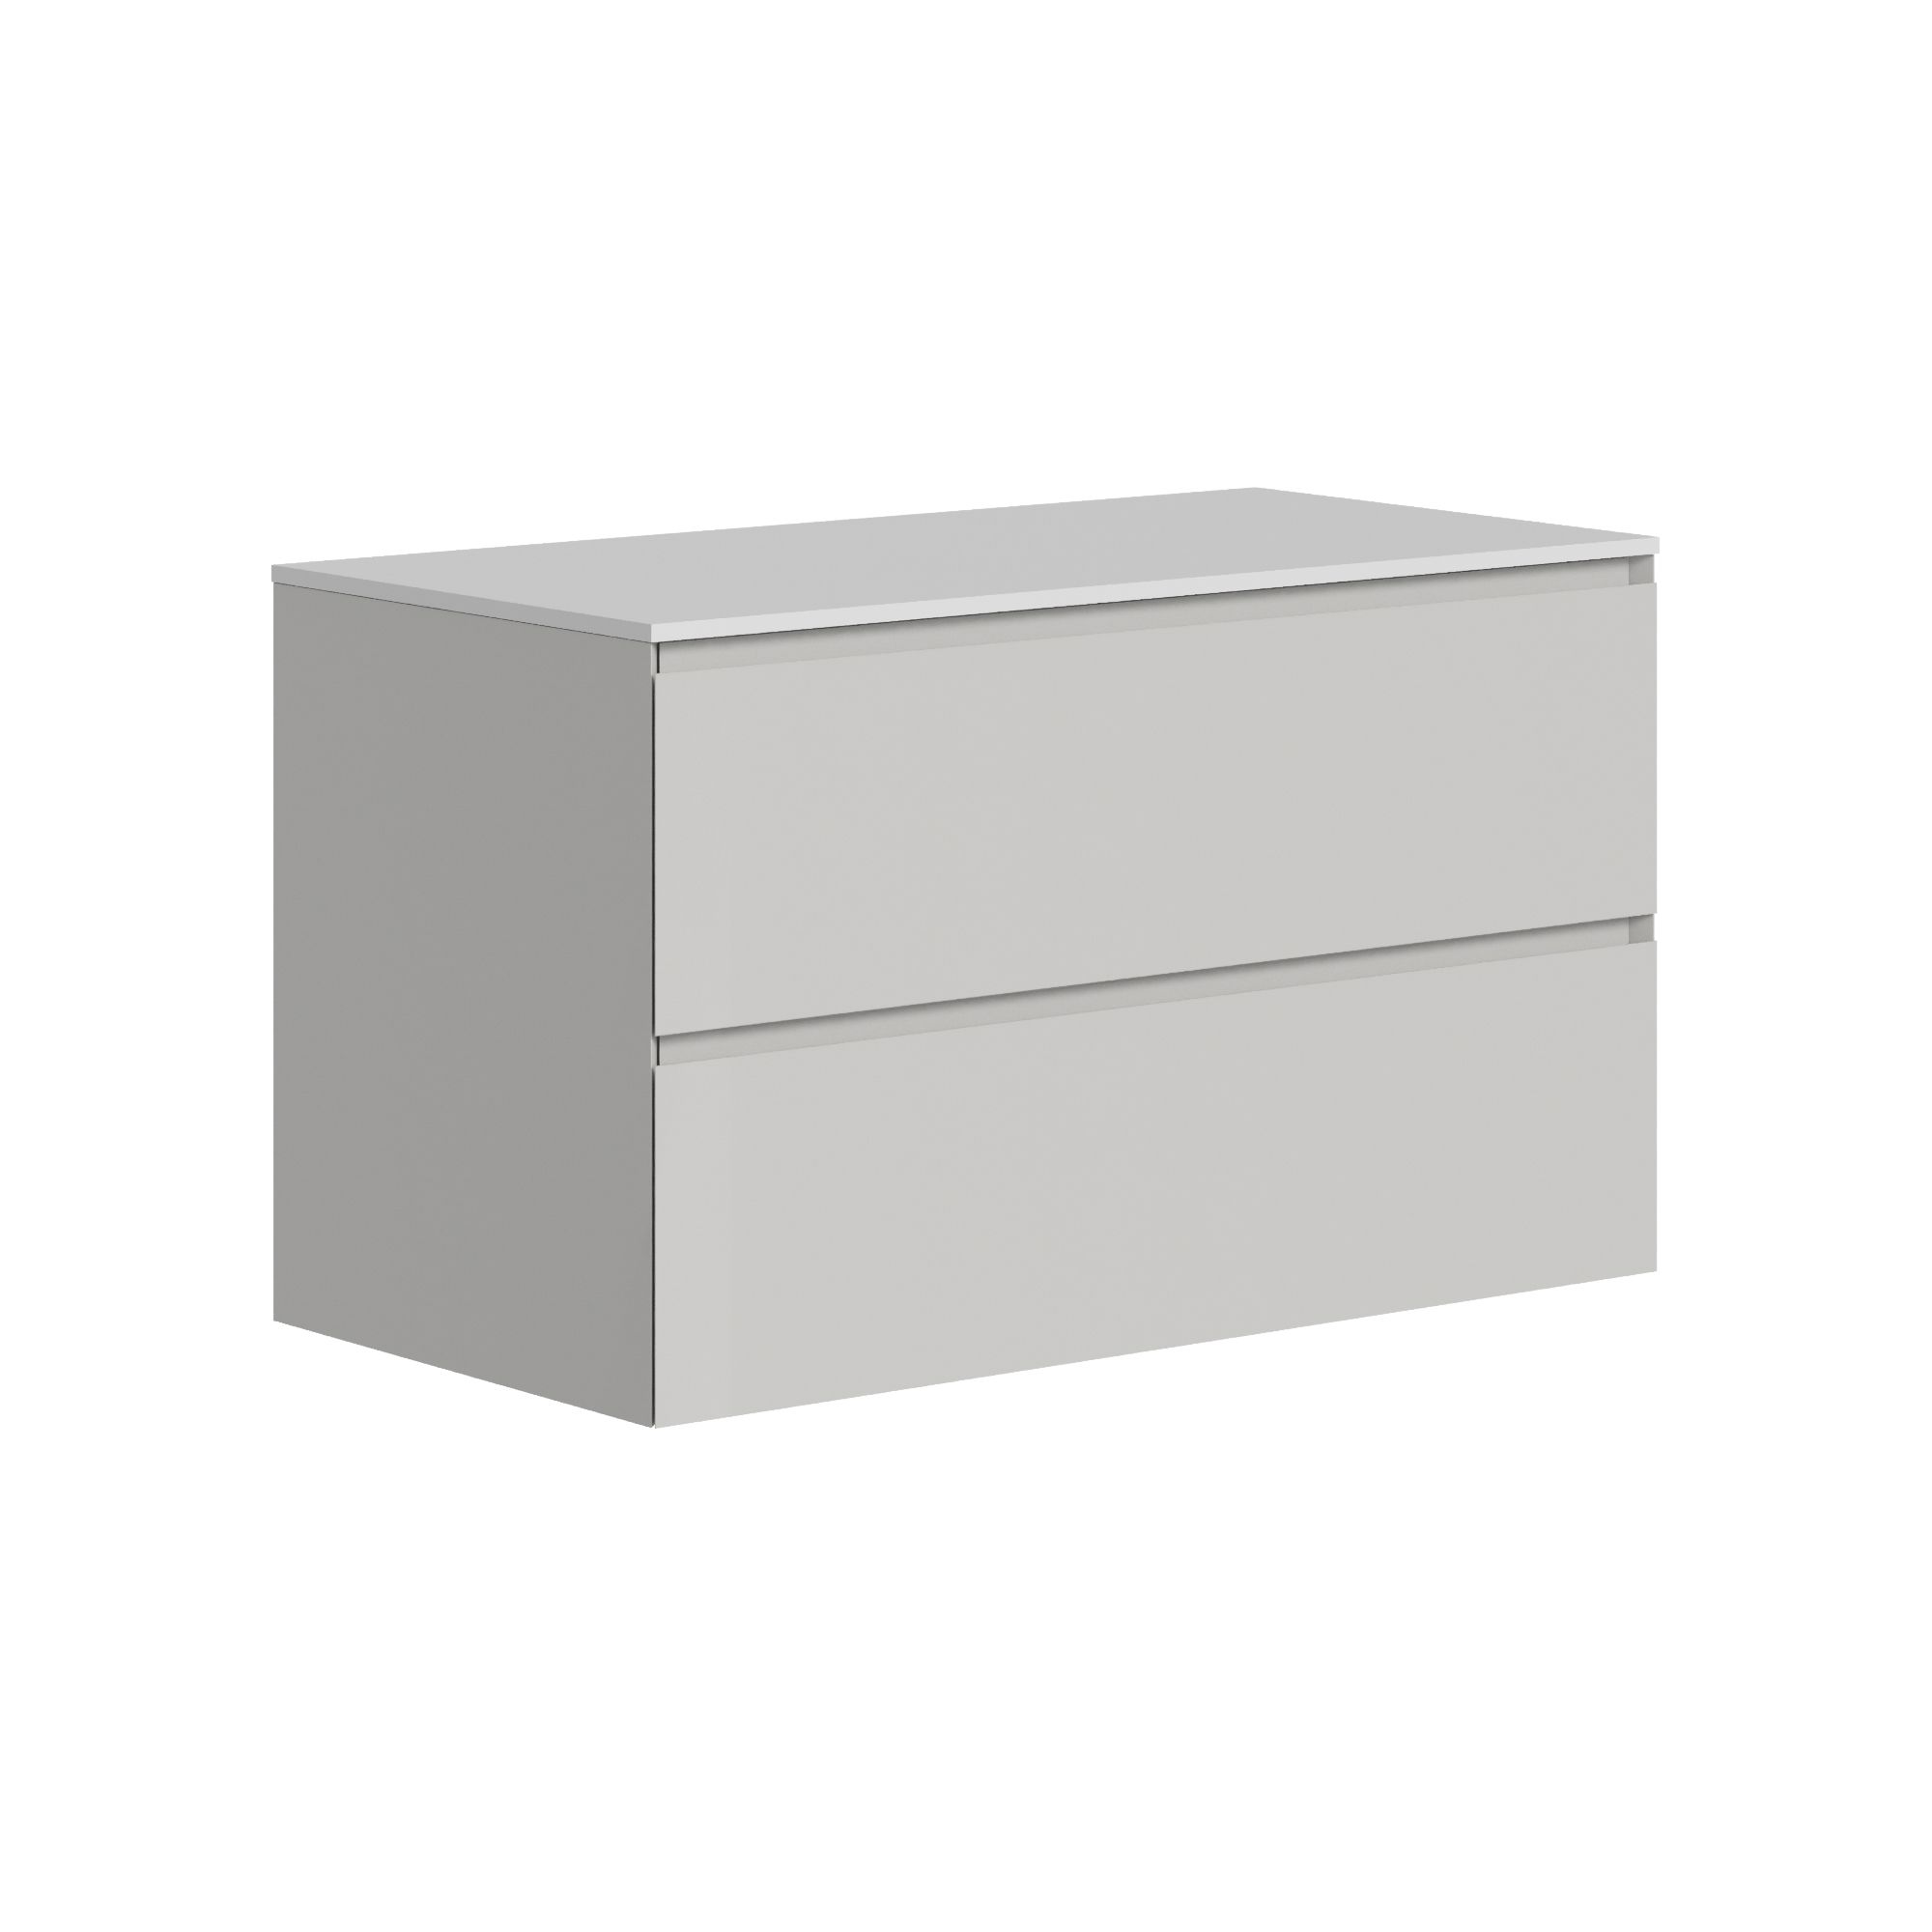 The Ellery Auxiliary Pull Open Unit 900x520mm with Solid Surface Countertop